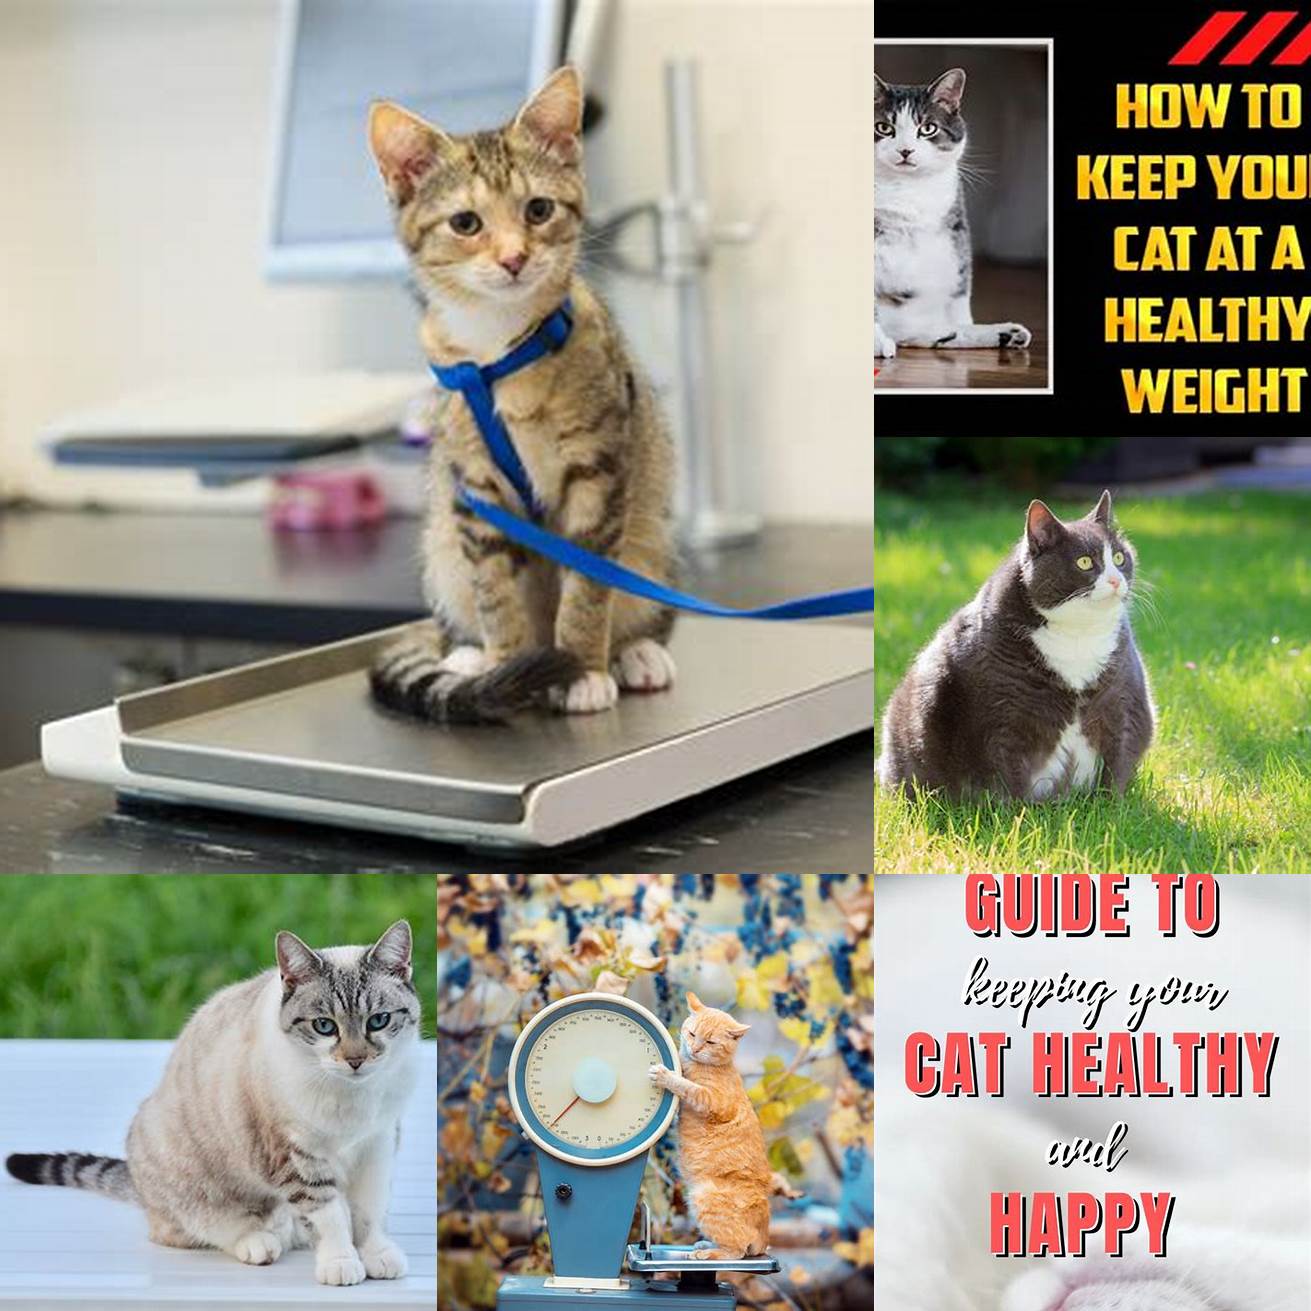 Keep your cat at a healthy weight